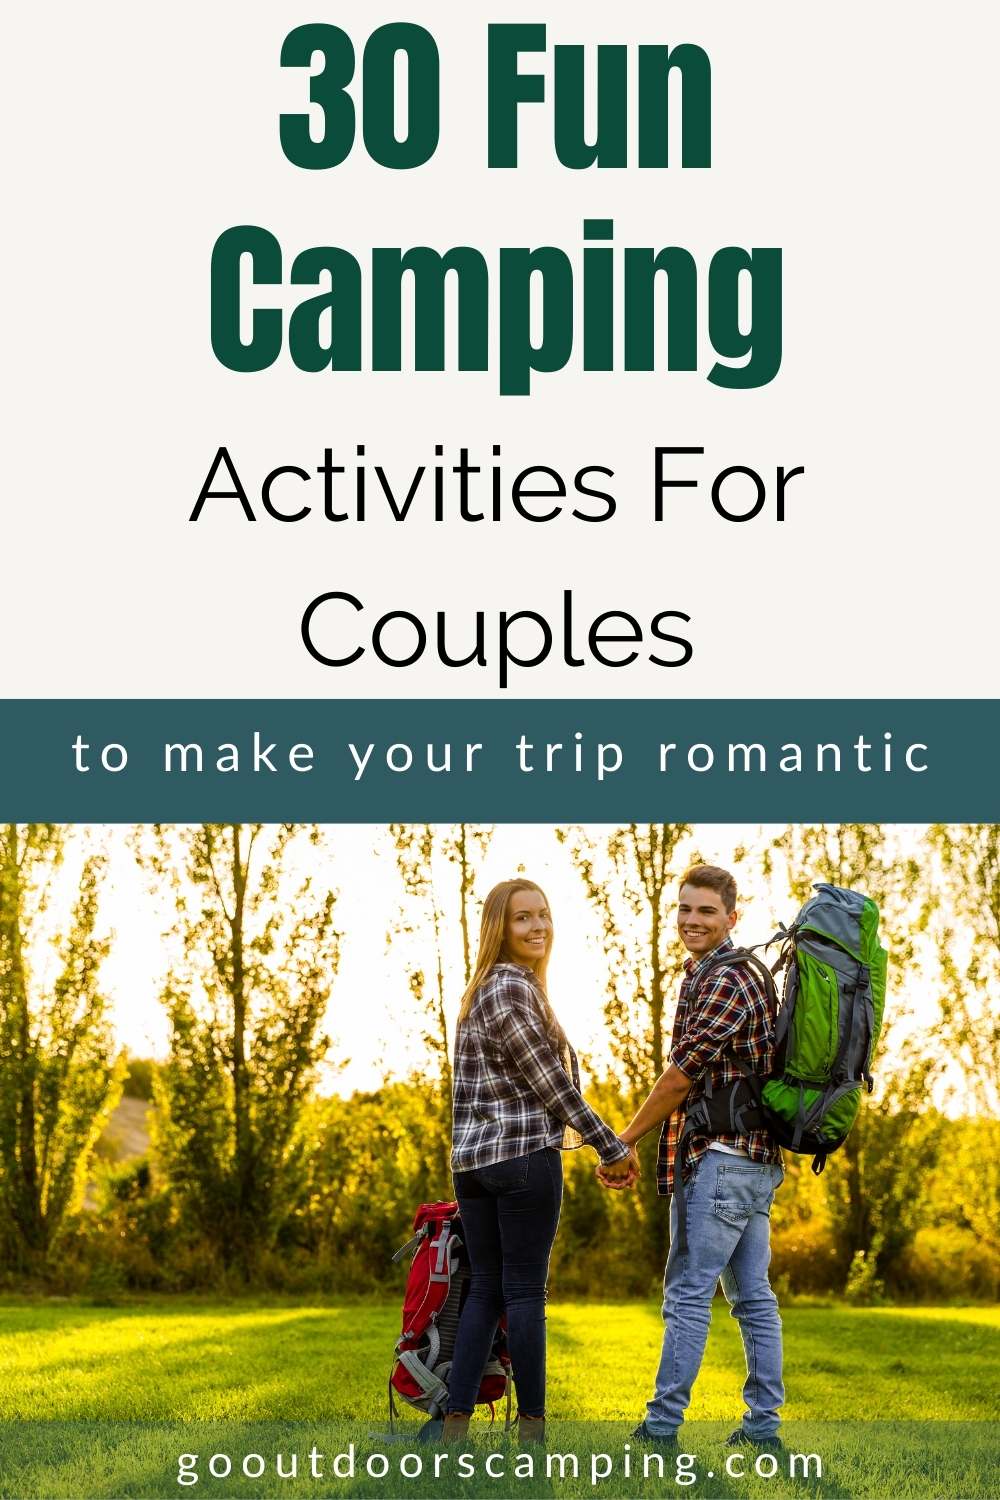 30 Fun, Cute Camping Activities For Couples